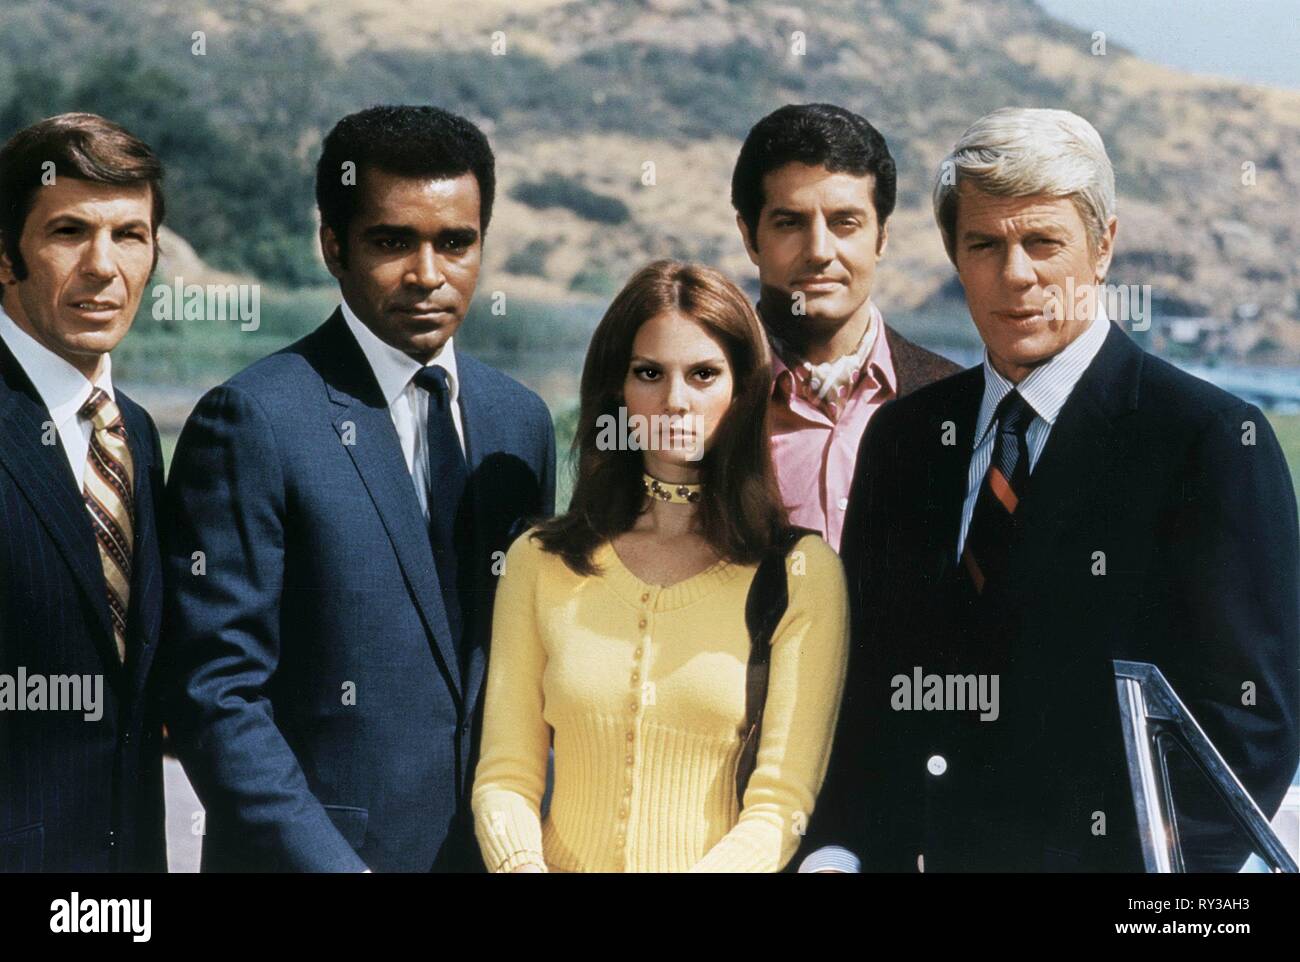 NIMOY,MORRIS,LUPIS,GRAVES, MISSION IMPOSSIBLE, 1971 Stock Photo